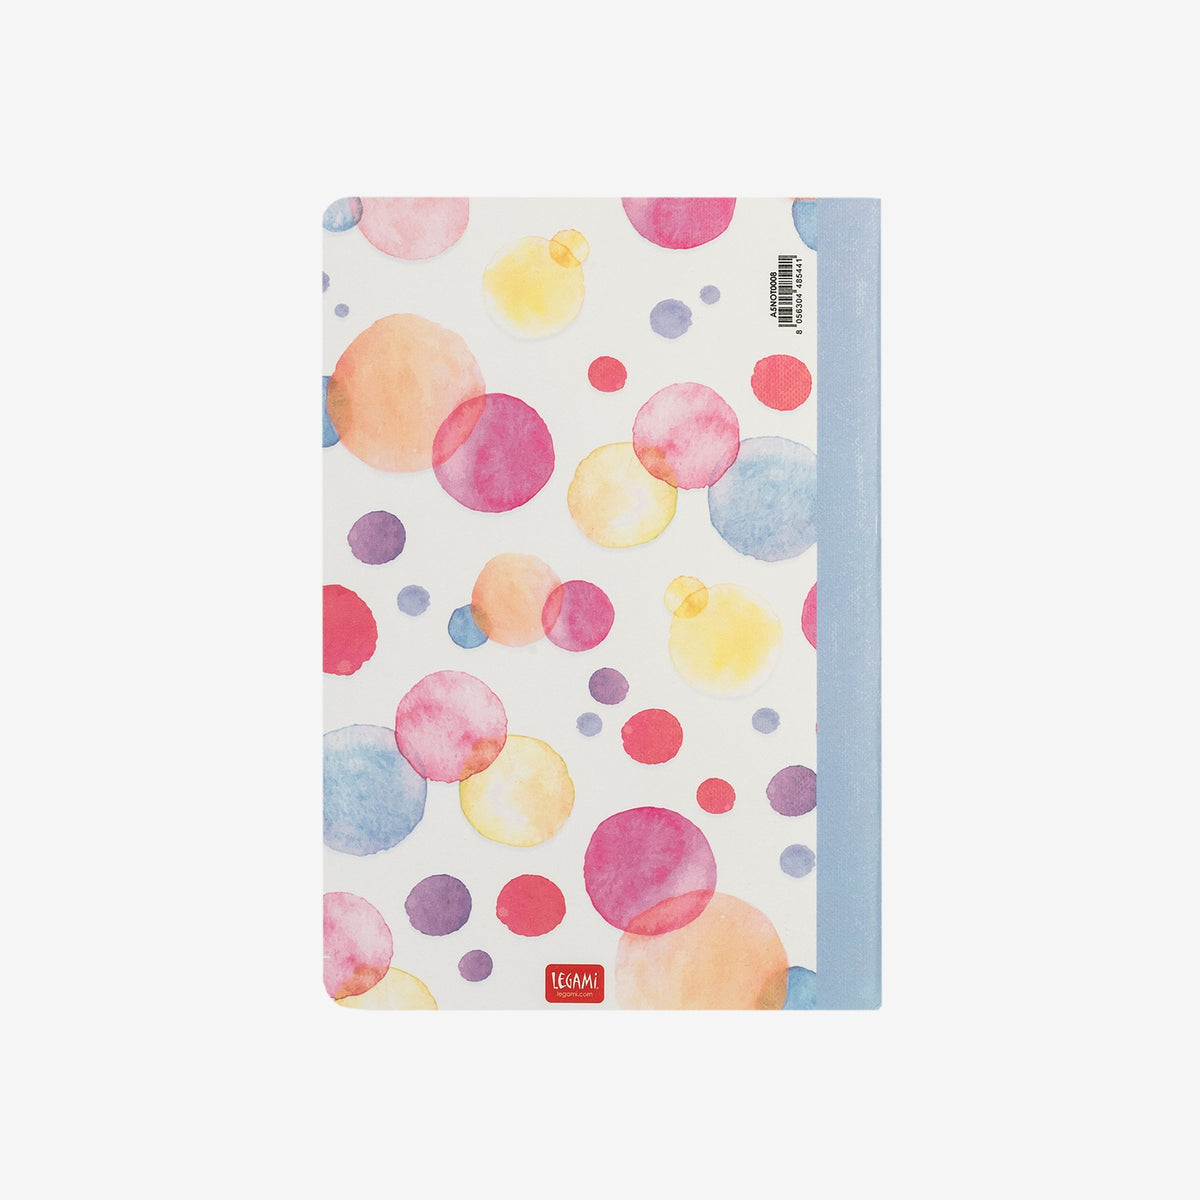 Legami Happiness Notebook Back Gifts Gift ideas Gifting Made Simple